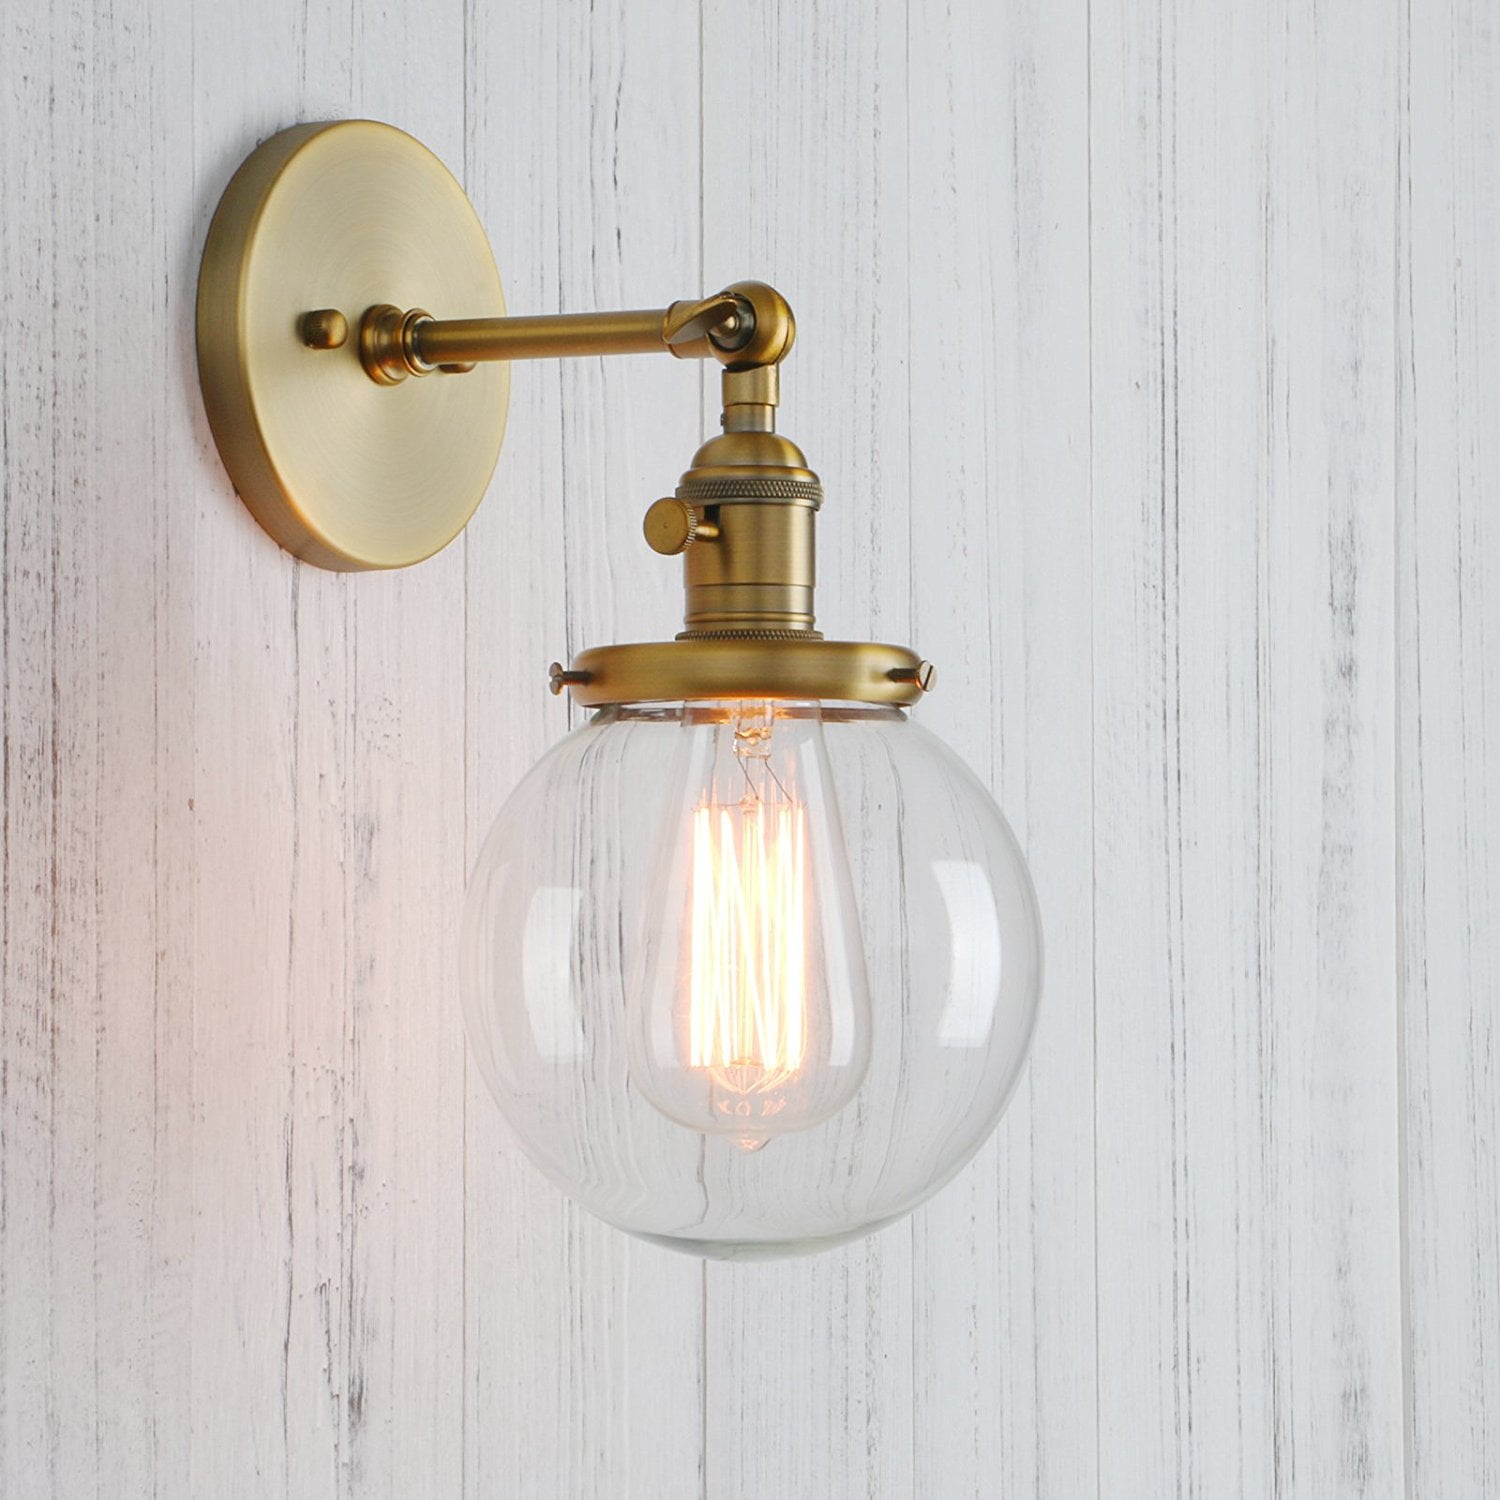 Permo Vintage Industrial Antique Three-Light Wall Sconces with Mini 5.9 Round Clear Glass Globe Shade Antique 